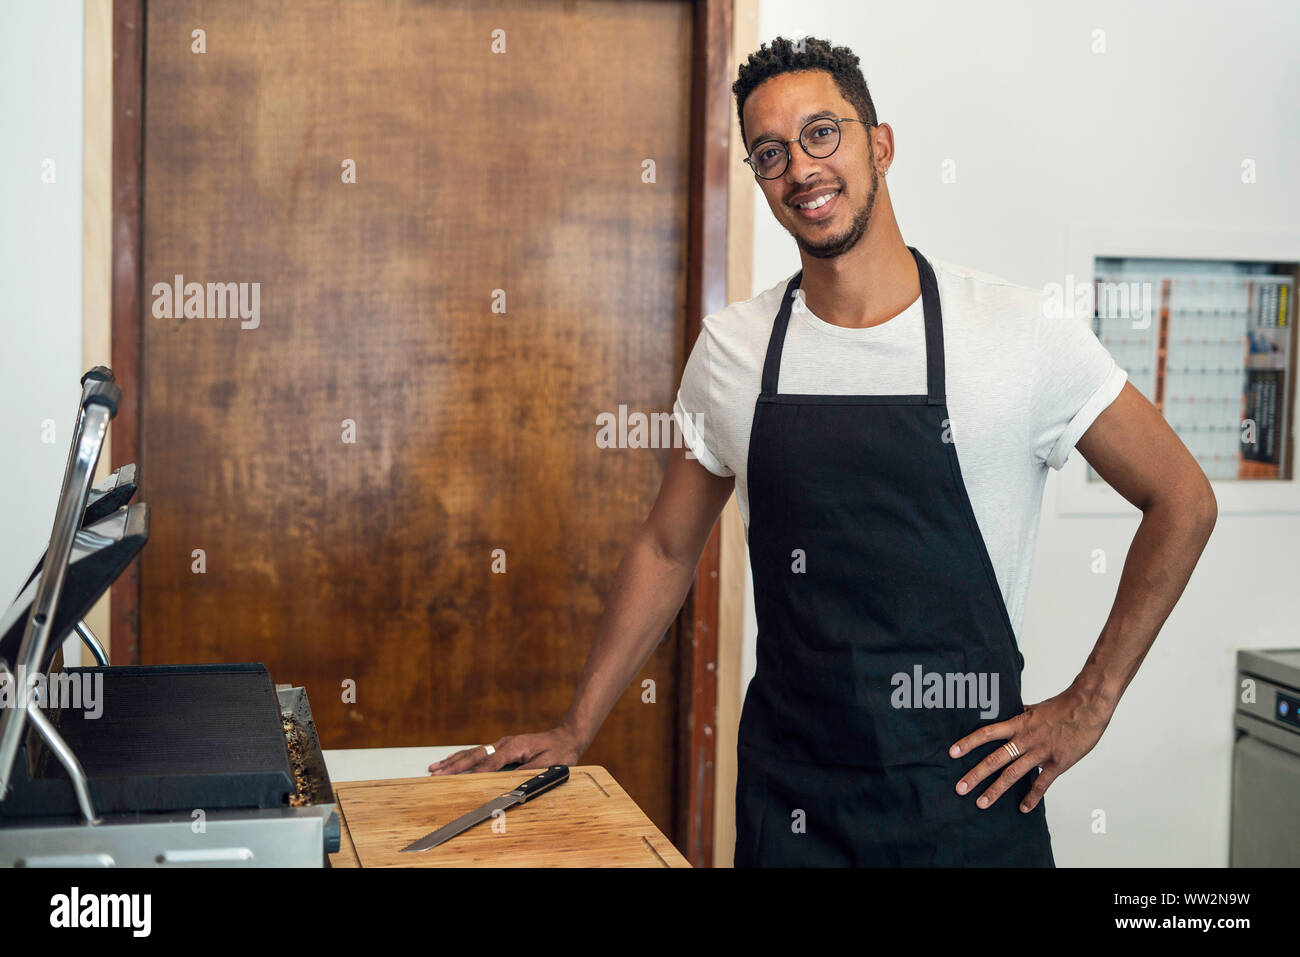 Portrait of man standing in commercial kitchen Stock Photo